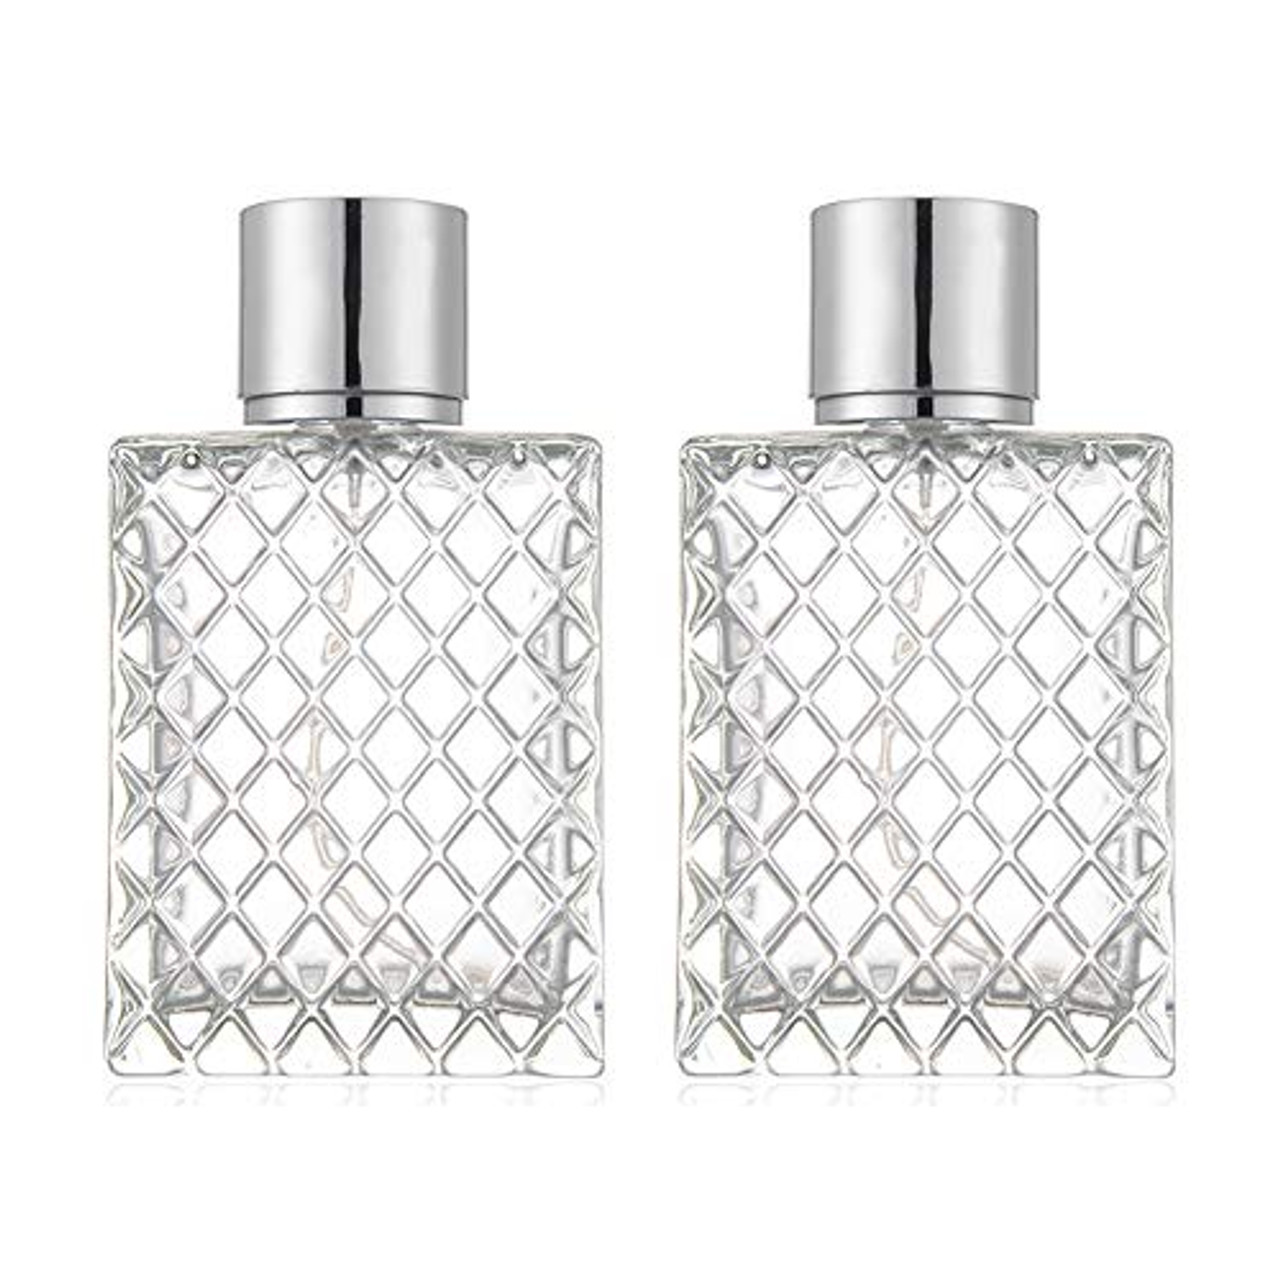 2pcs 100ml Square Grids Carved Perfume Bottles Clear Glass spray bottle  Empty Refillable fine mist Atomizer Portable Travel Cologne Atomizers